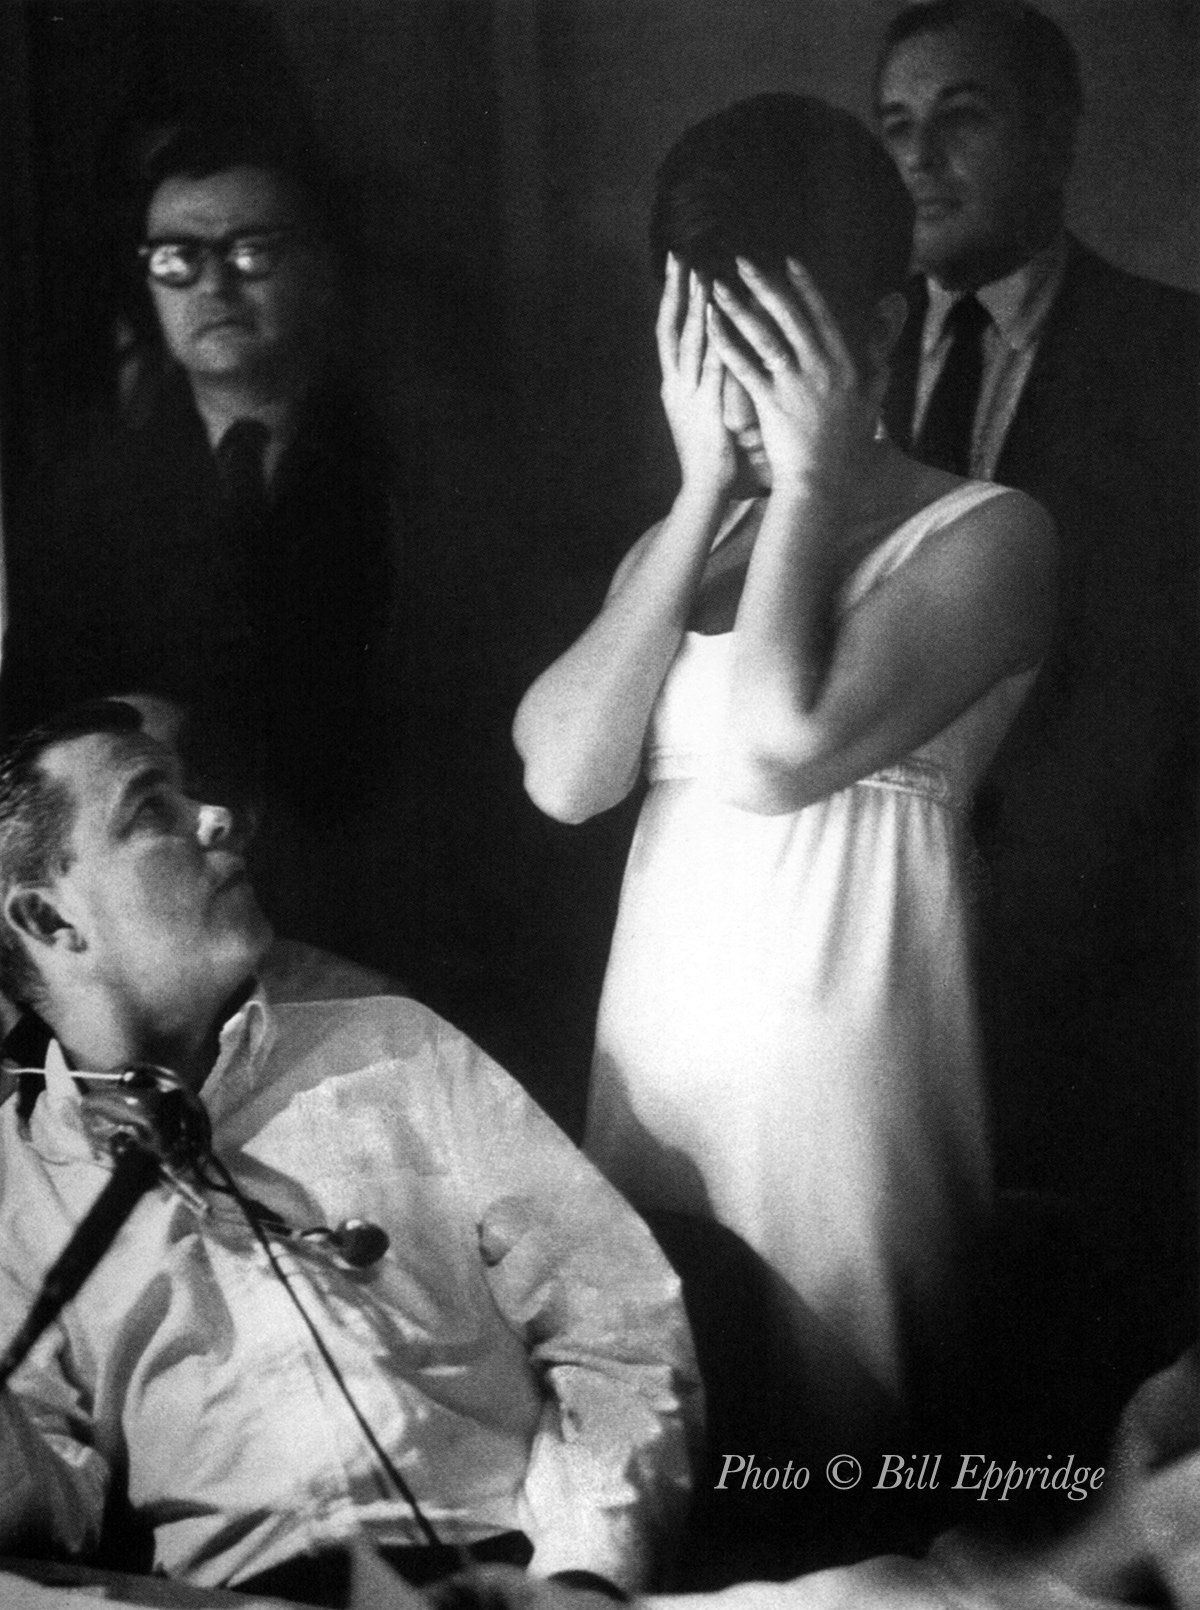 Streisand, in the video control booth, hides her eyes during video playback.  Dwight Hemion turns around, while Marty Erlichman (in glasses) watches.